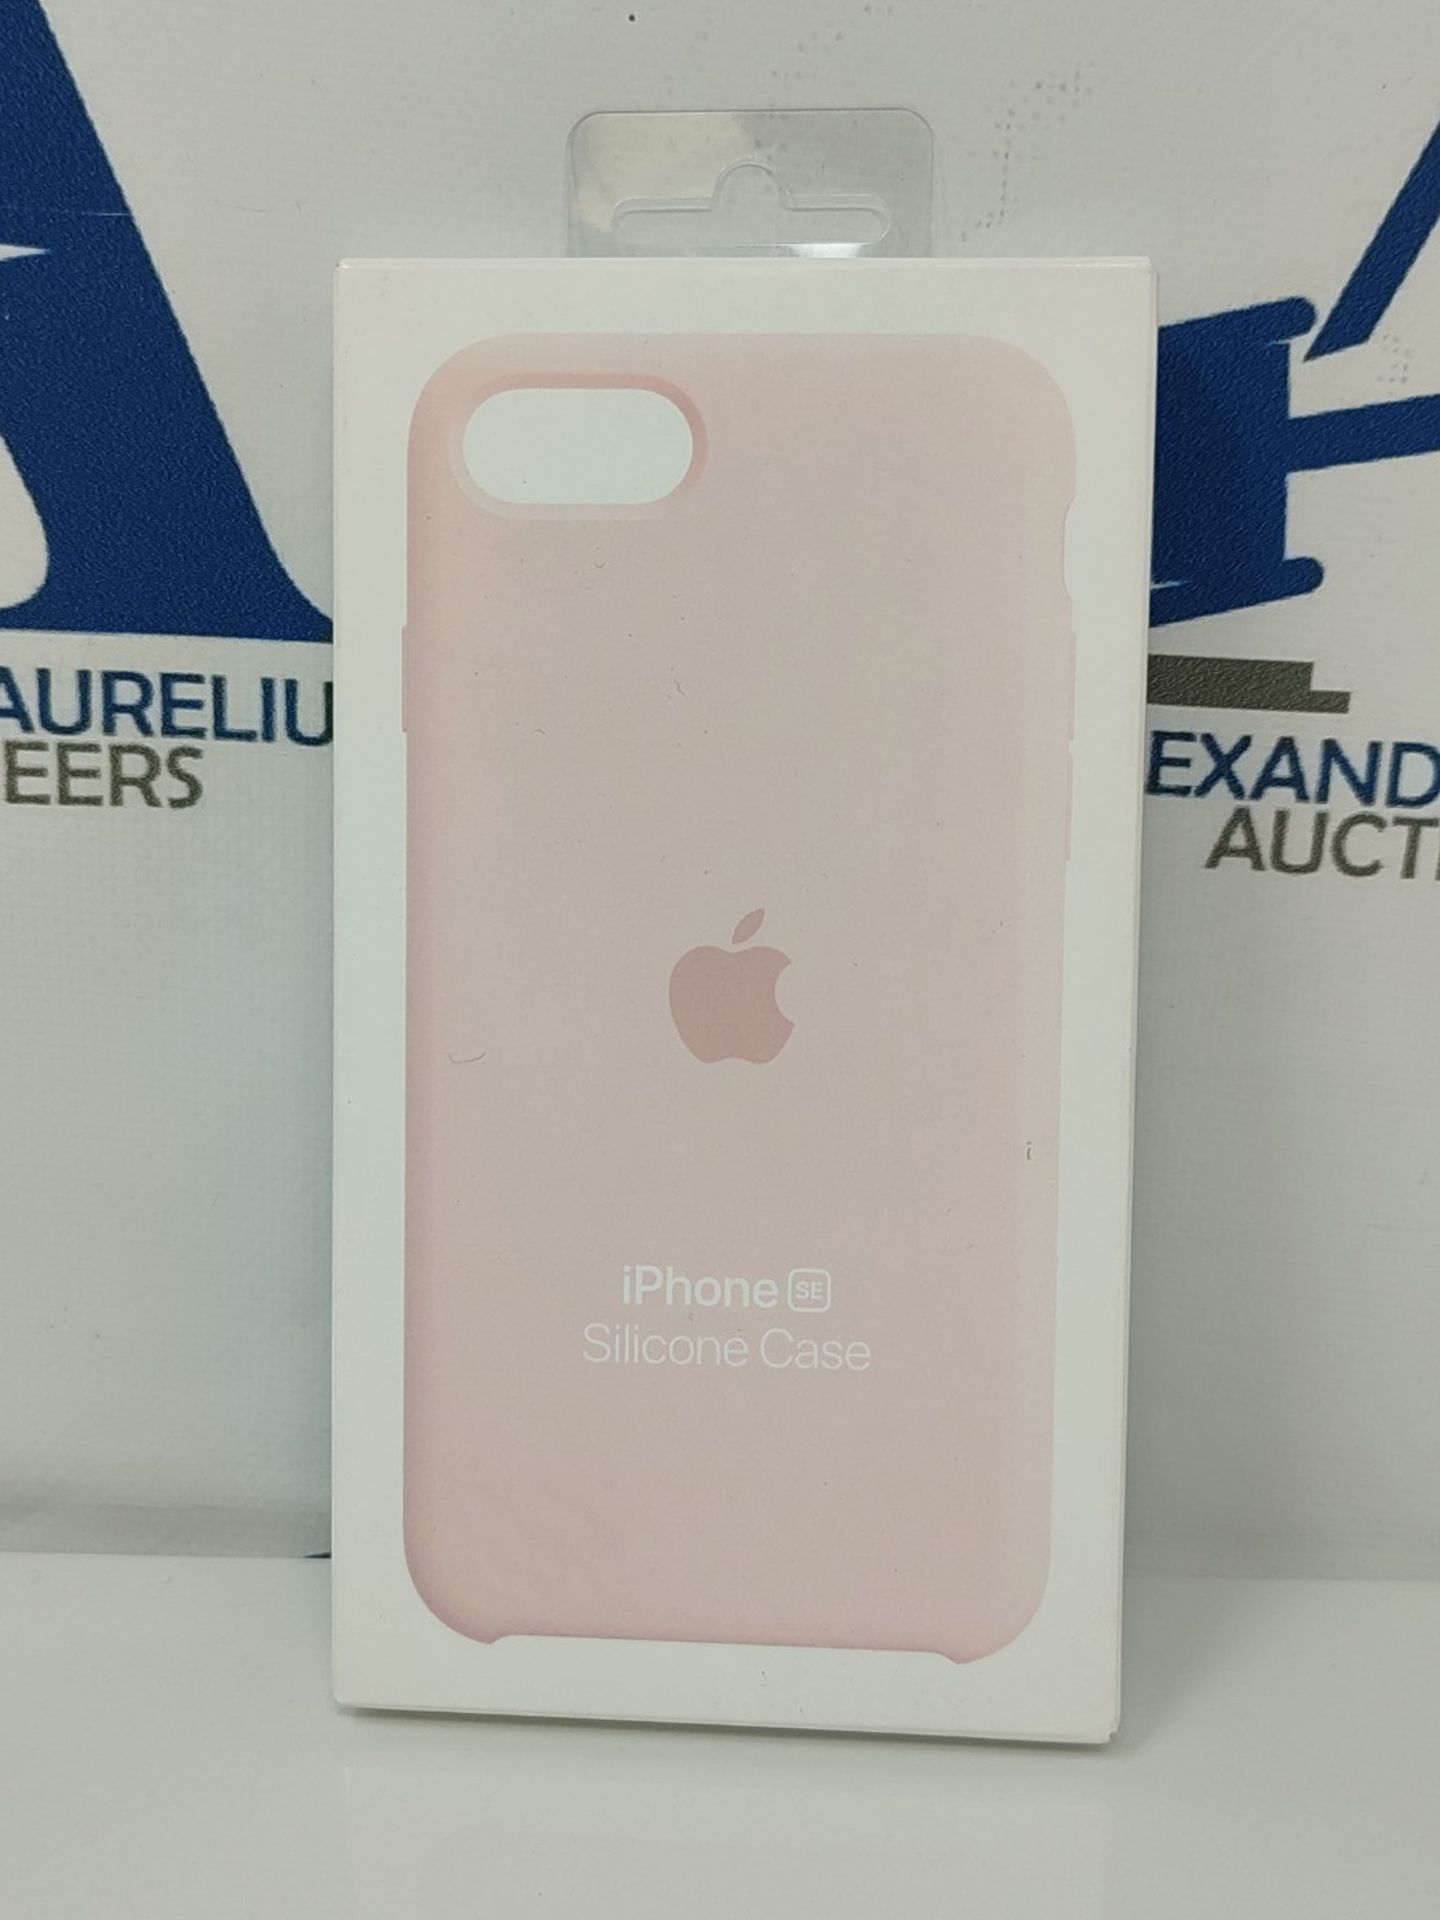 Apple Silicone Case (for iPhone SE) - Chalk Pink - Image 2 of 3